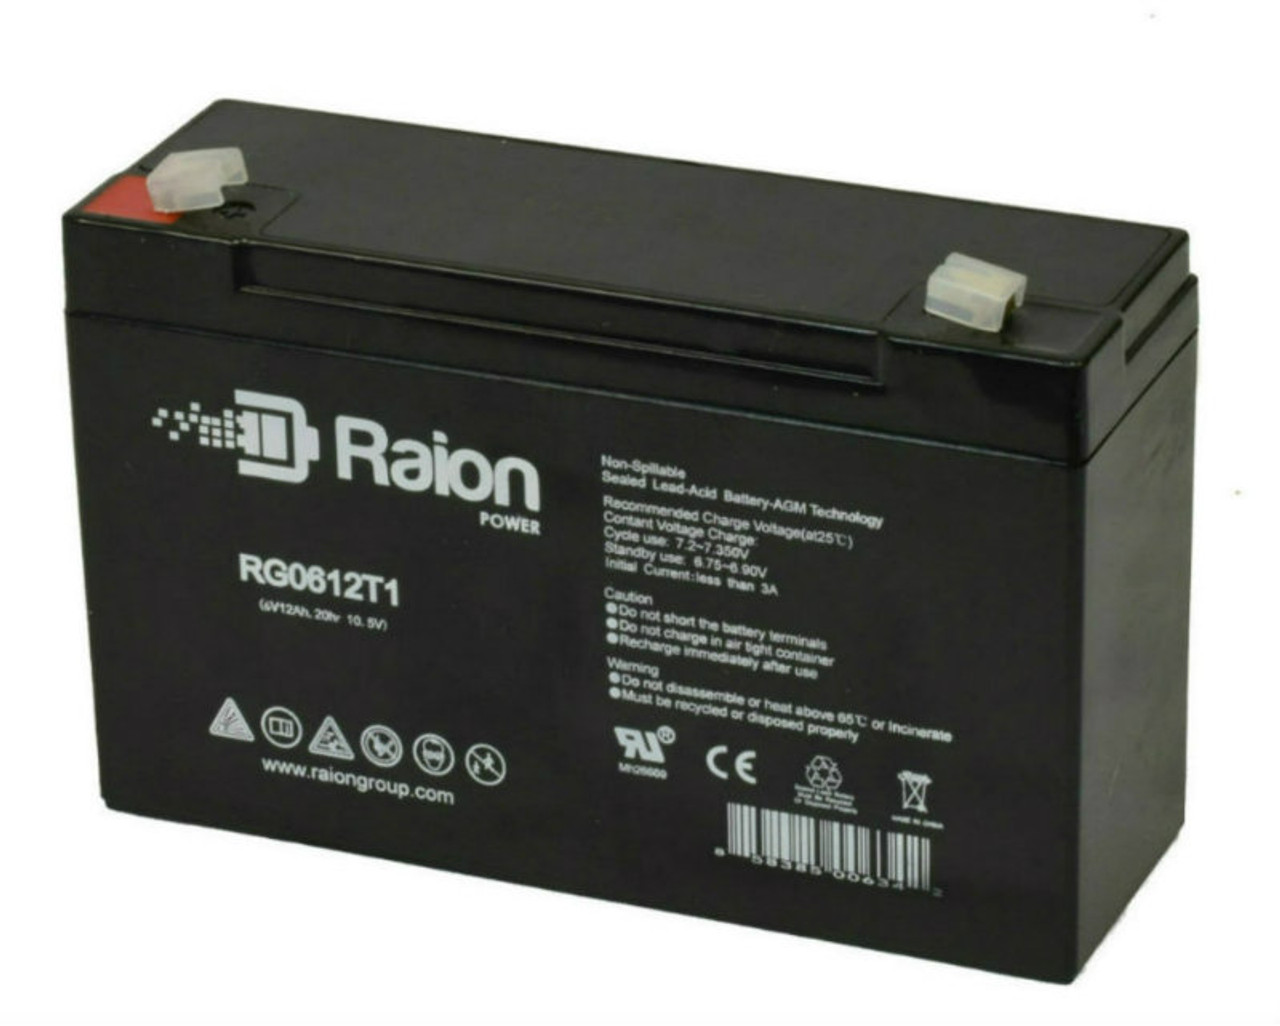 Raion Power RG06120T1 Replacement Battery for MK ES12-6